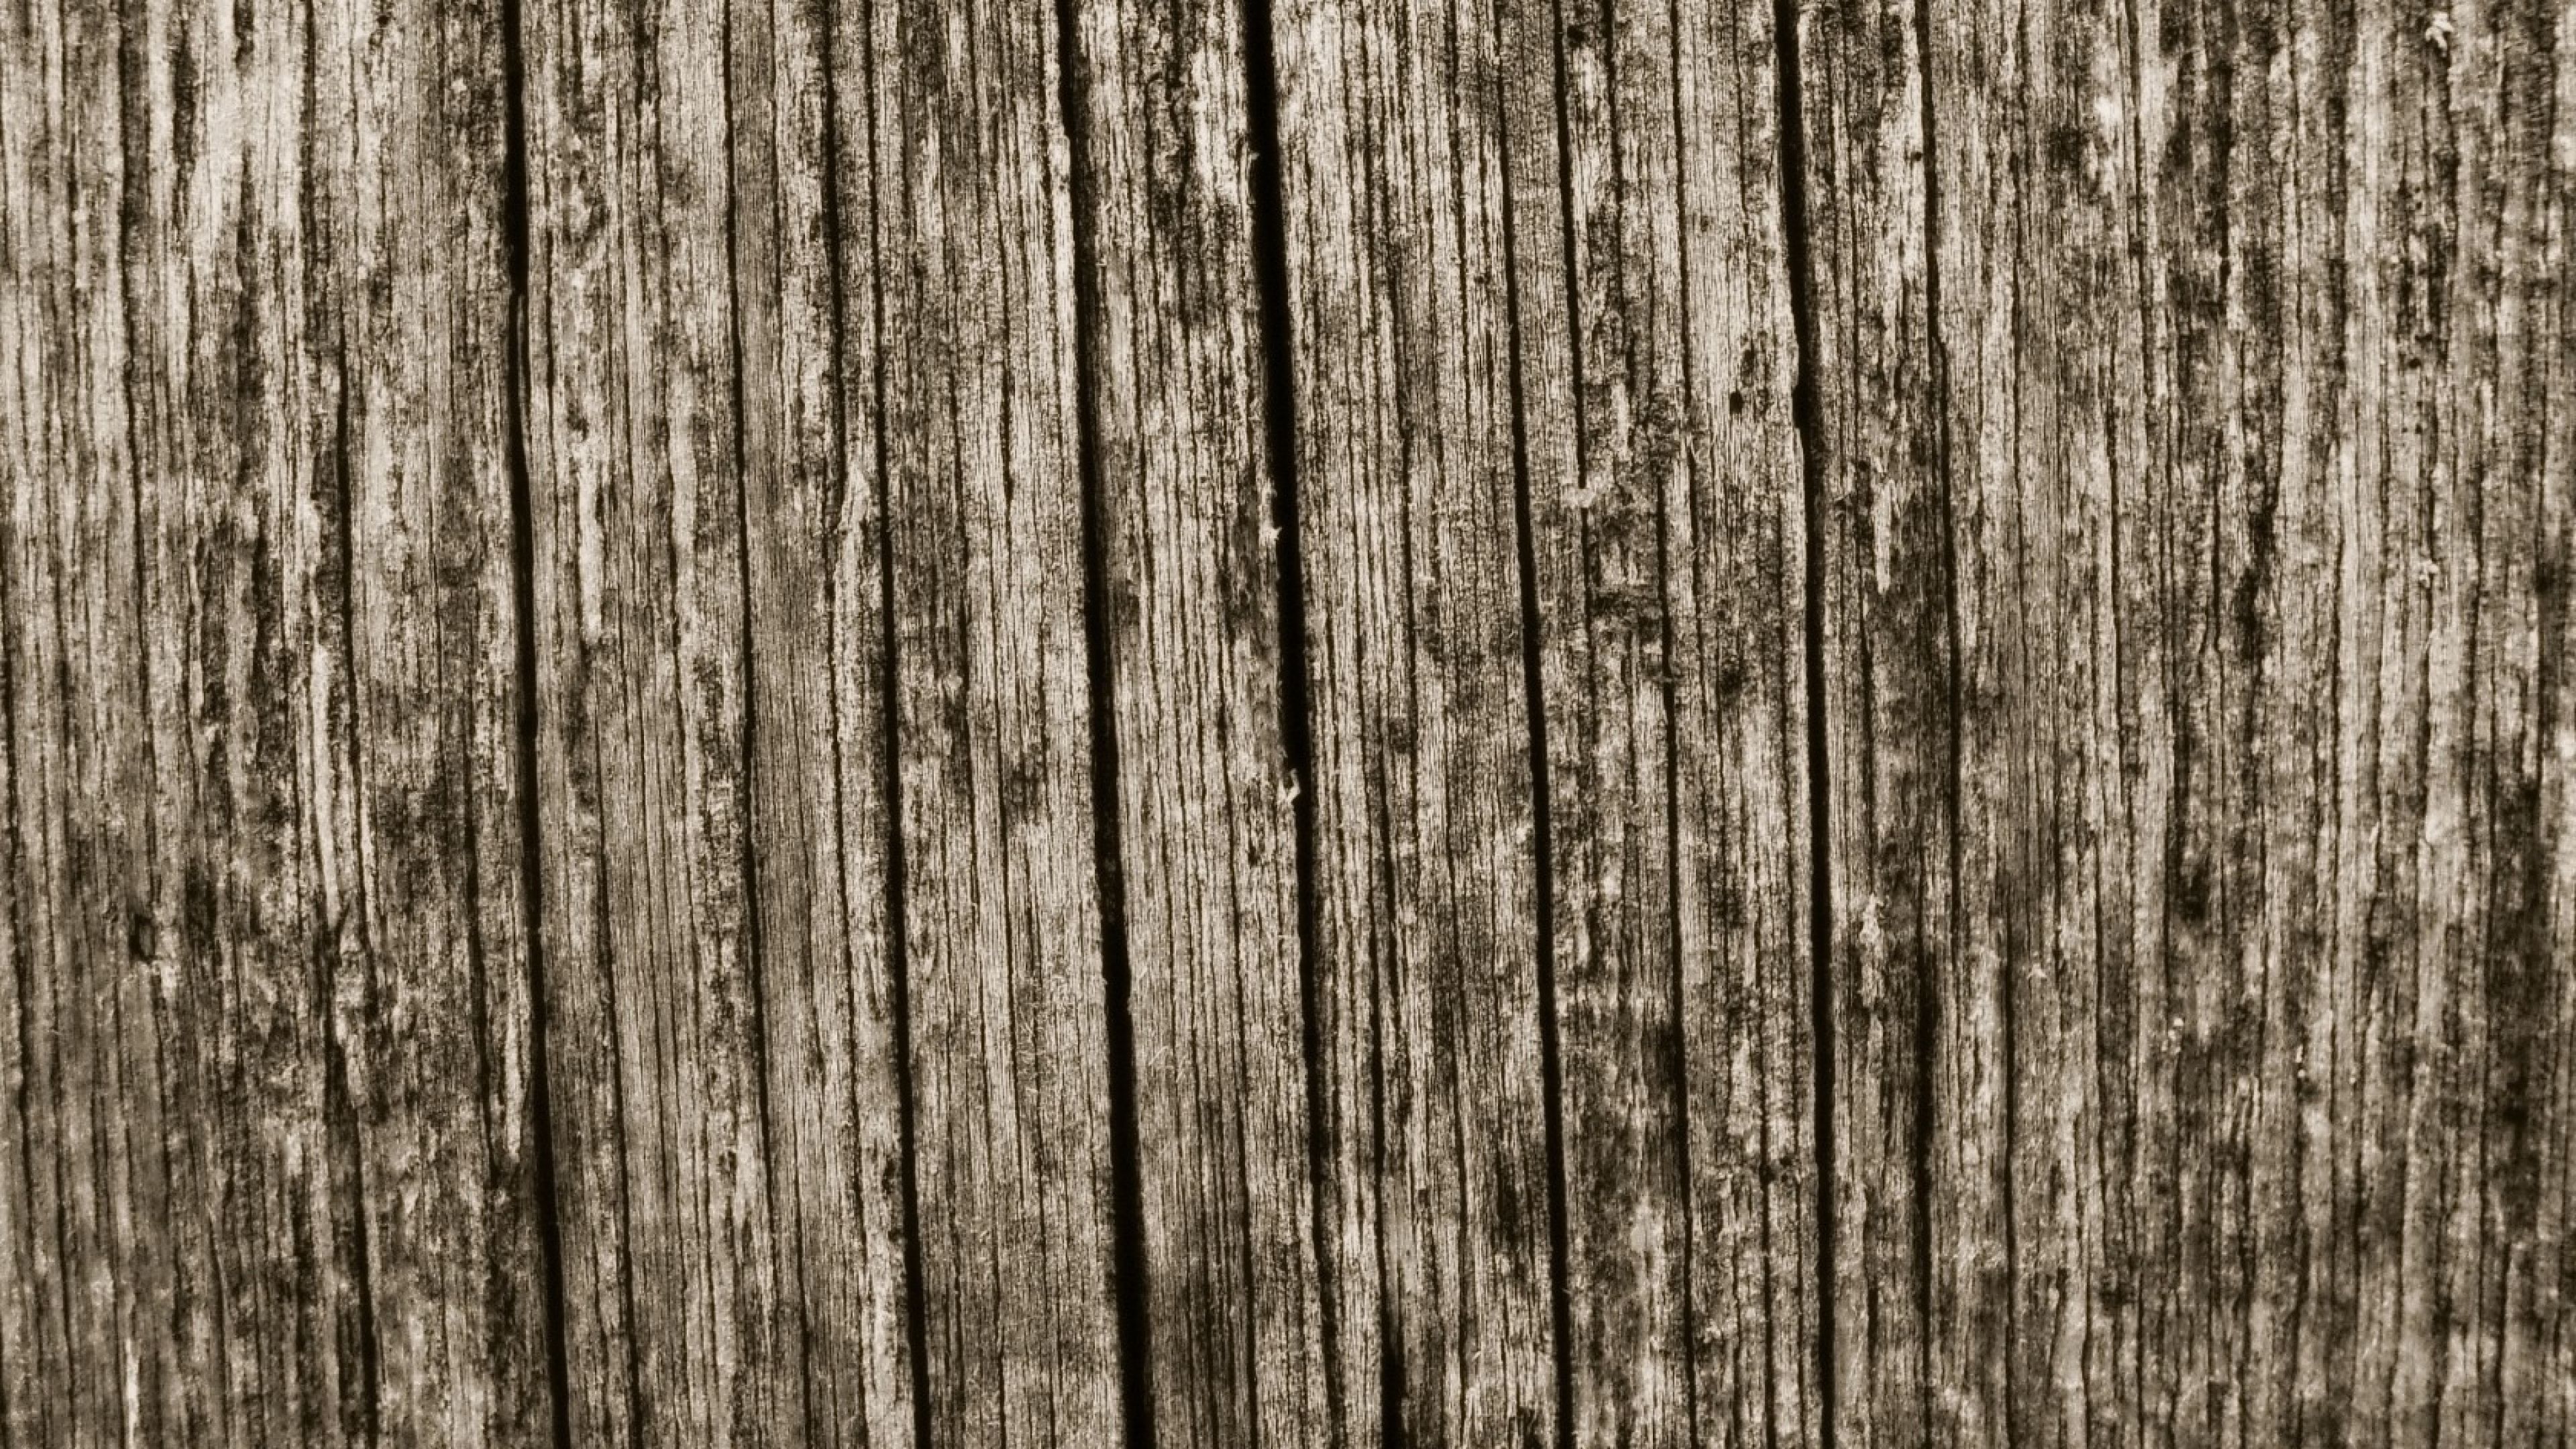 9+ 4K Wood Wallpapers: HD, 4K, 5K for PC and Mobile | Download free images  for iPhone, Android